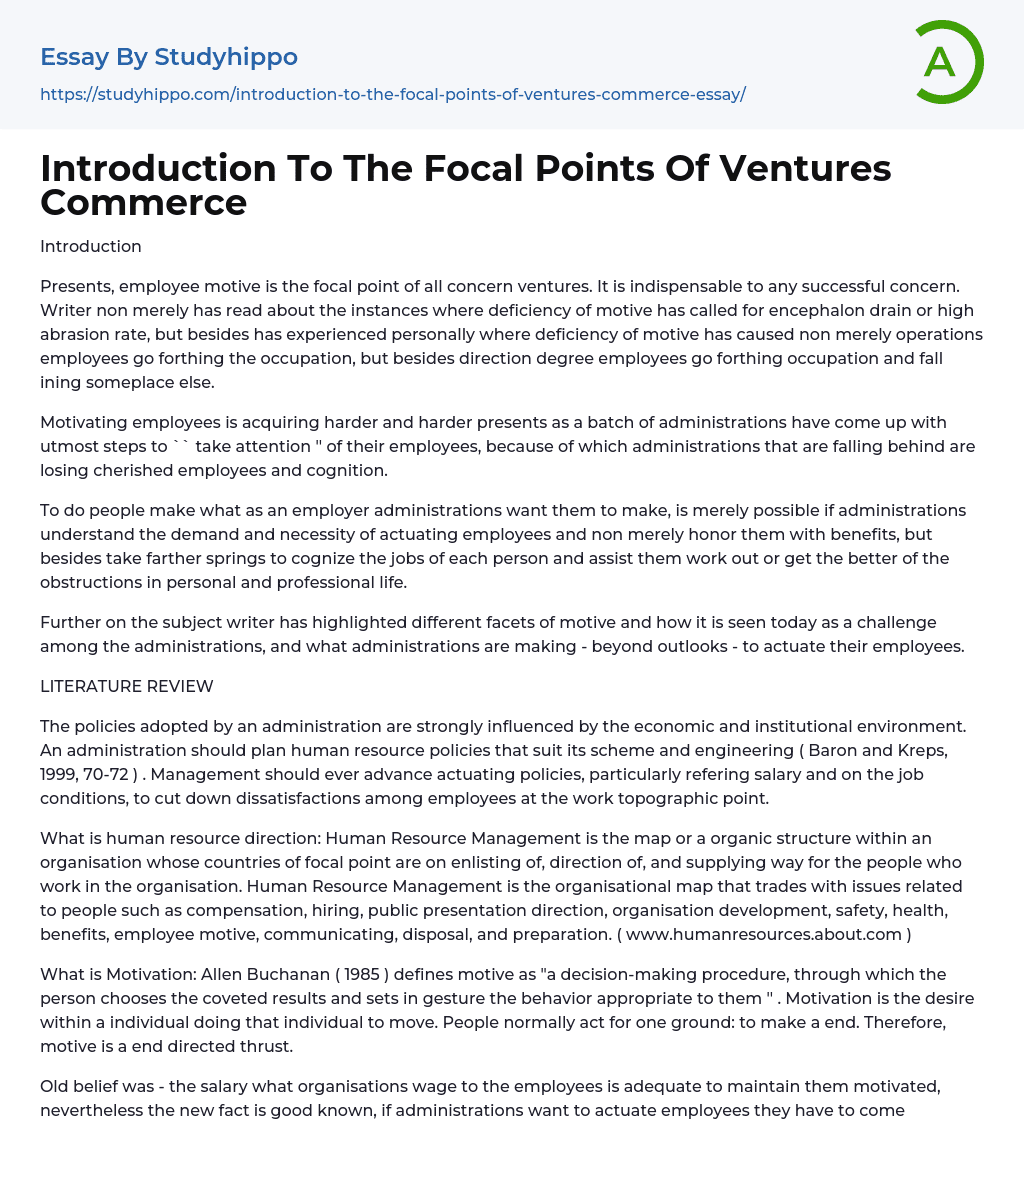 Introduction To The Focal Points Of Ventures Commerce Essay Example